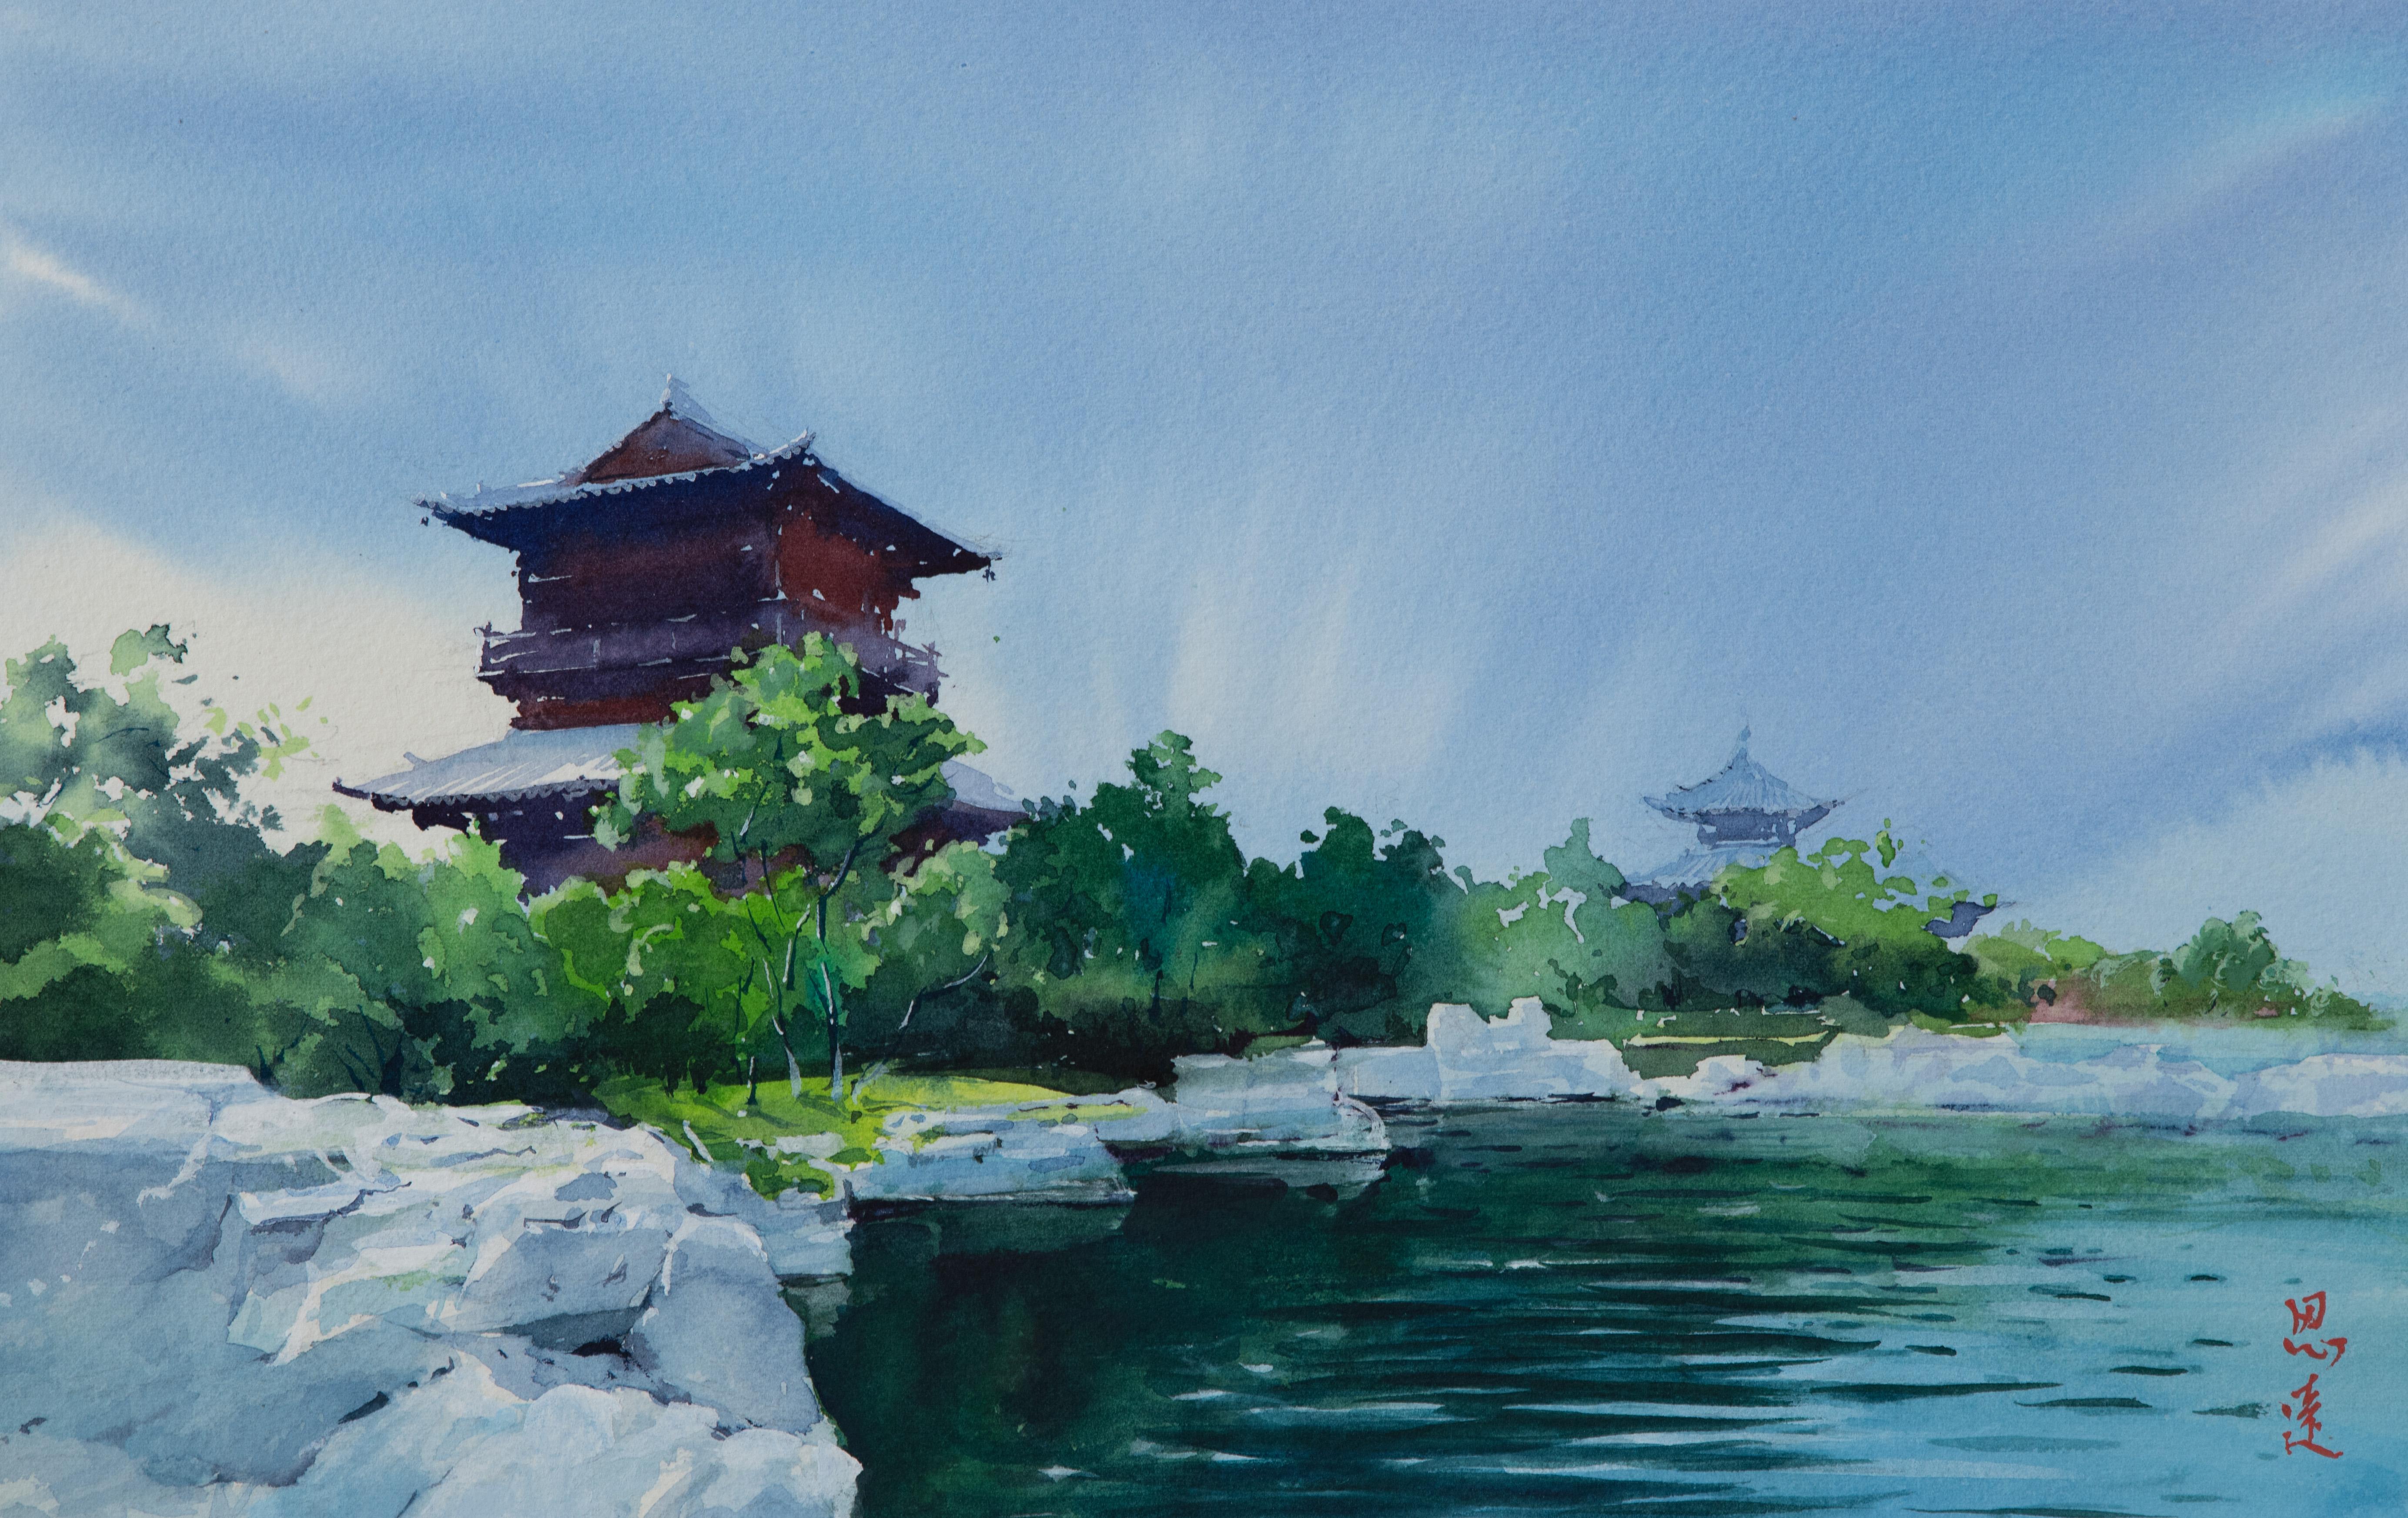 Watercolor Impressions of Chinese Architecture 9, Original Painting - Art by Siyuan Ma